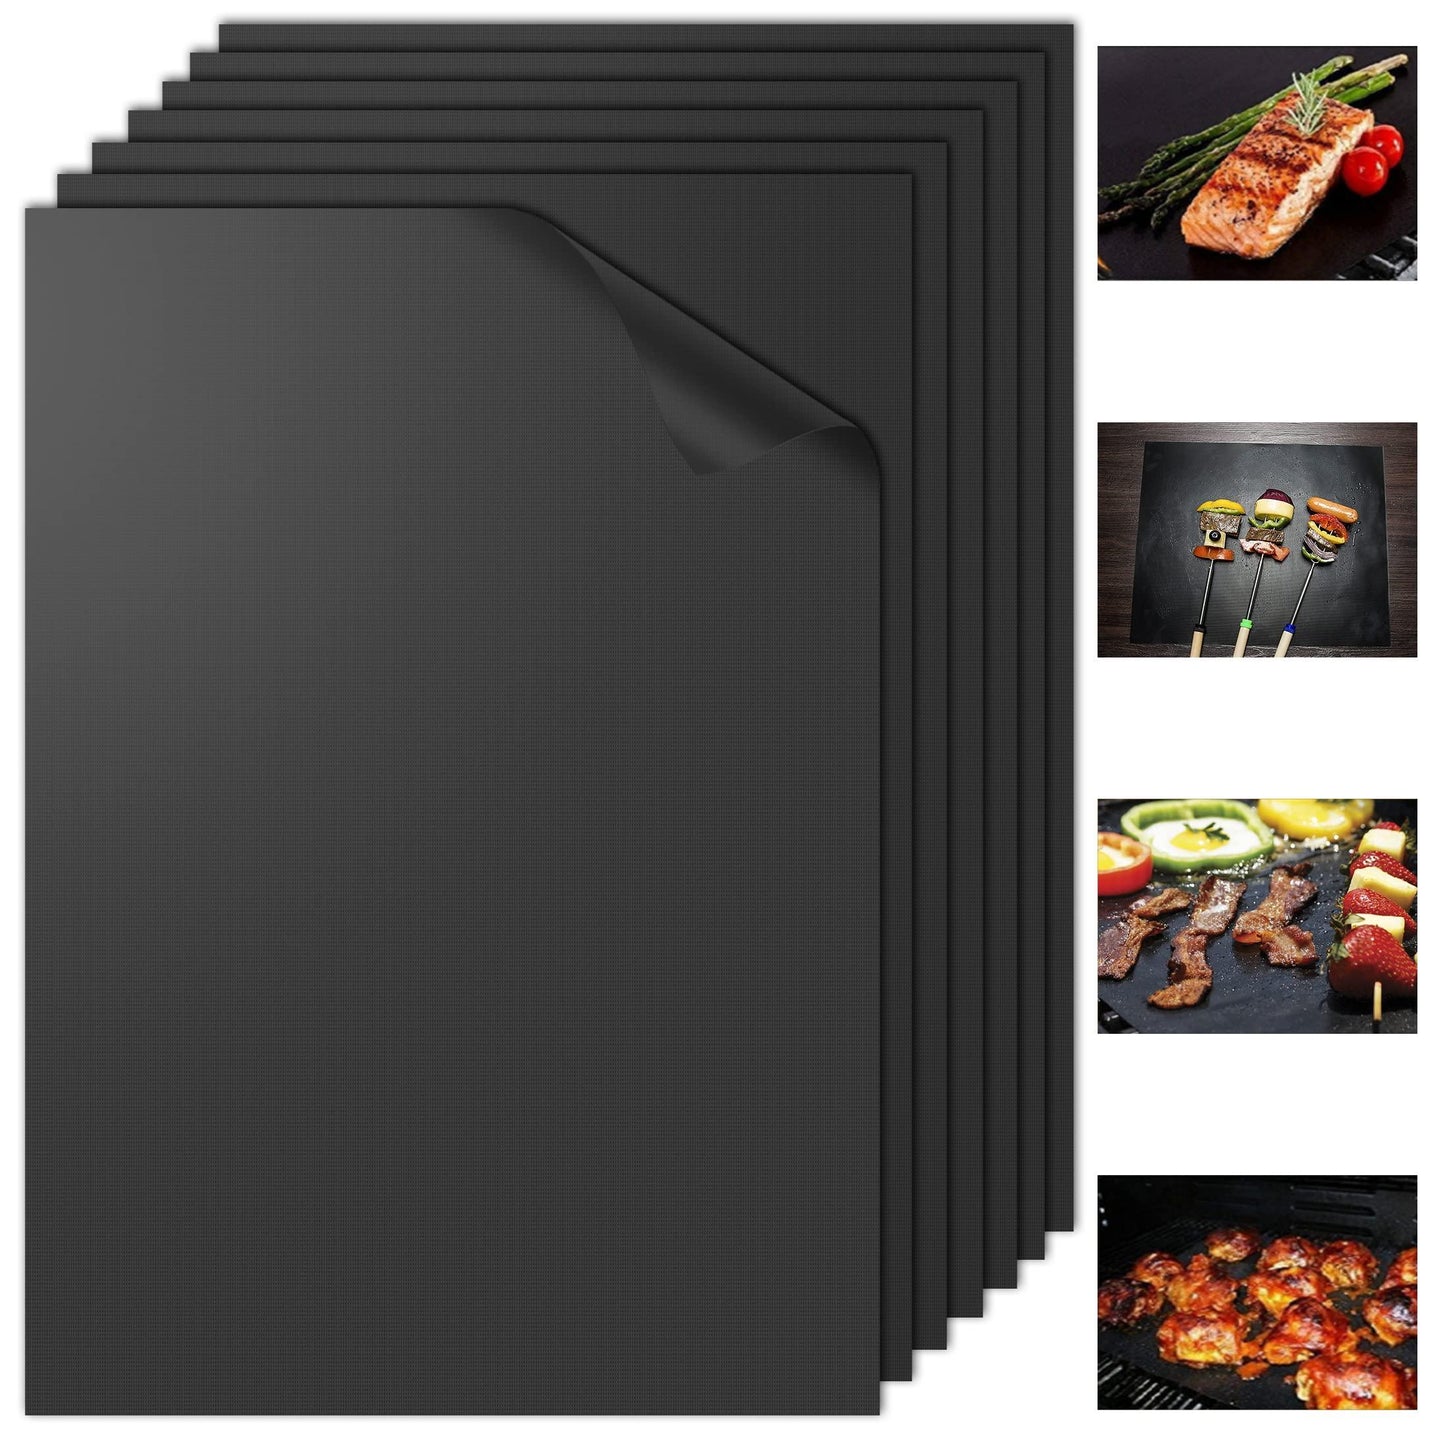 Smaid- Grill Mat Set of 7-Non-Stick BBQ Grill Mats&Baking Mats for Outdoor Gas Grill-Reusable,Heavy Duty and Easy to Clean-Works on Gas,Charcoal and Electric-15.75 * 13 Inch…… - CookCave